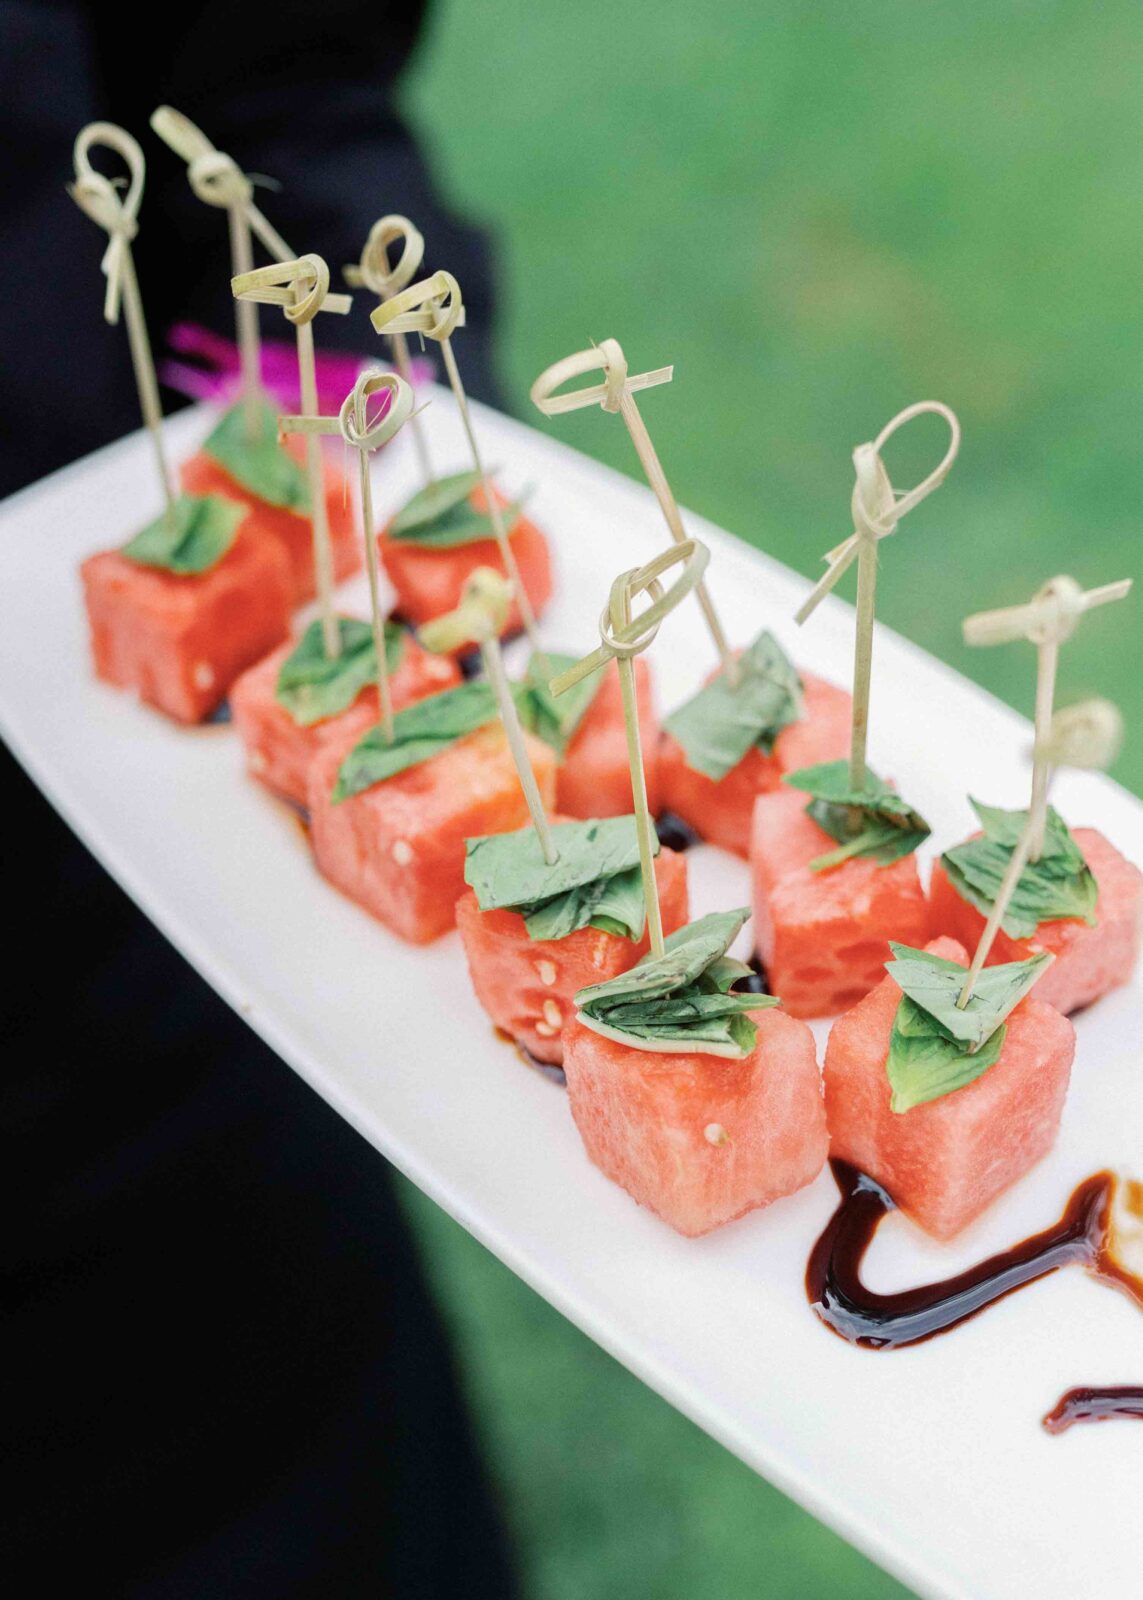 watermelon appetizer with basil 